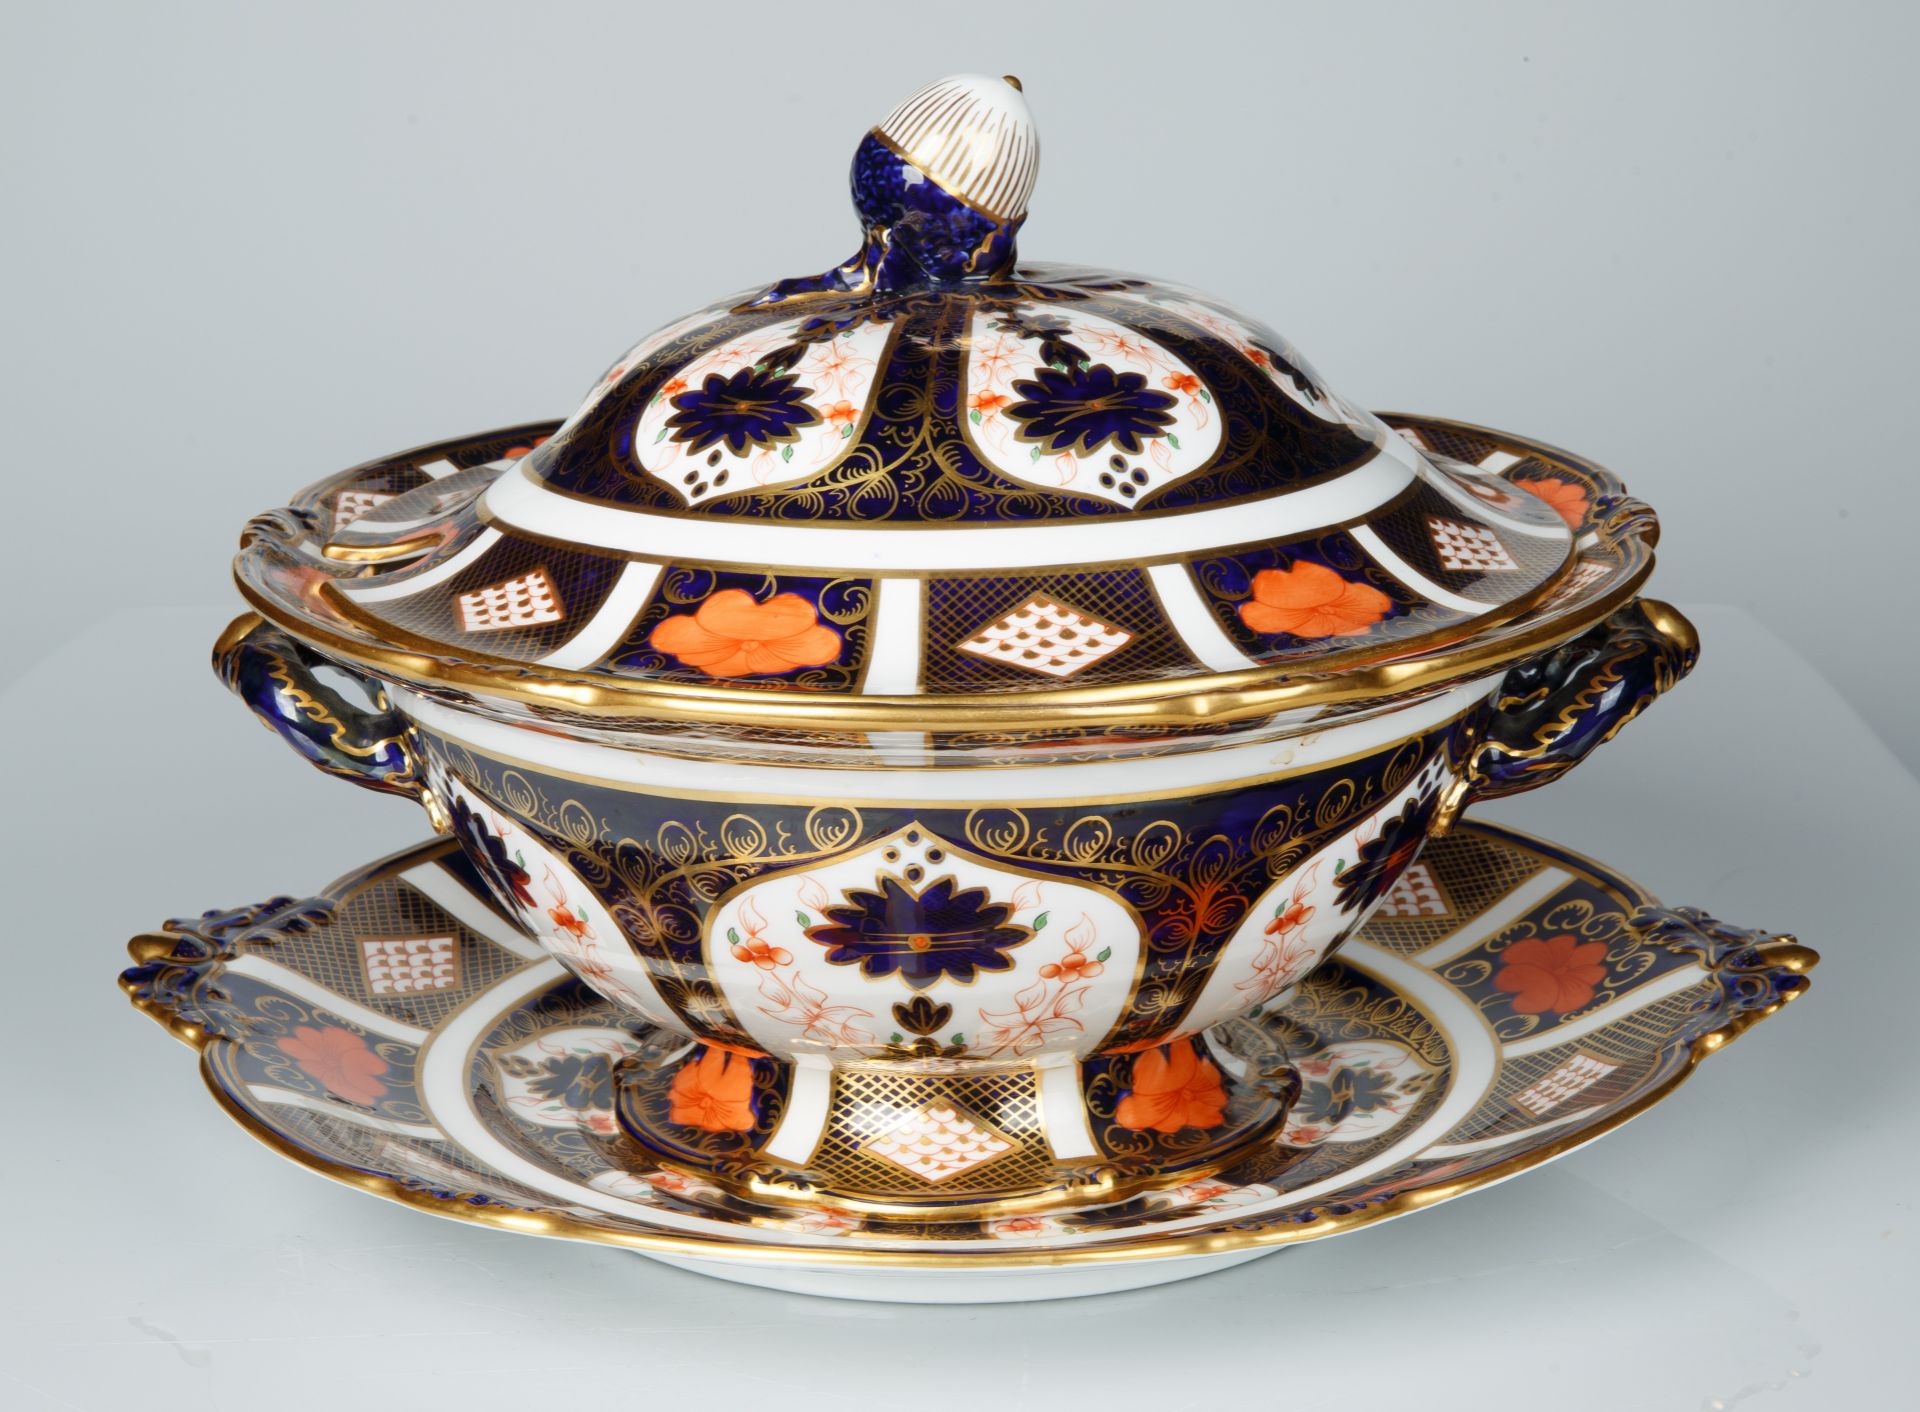 A ROYAL CROWN DERBY PORCELAIN COVERED DISH AND PLATTER IN TRADITIONAL IMARI PATTERN, CIRCA 1921-1965 - Image 2 of 8